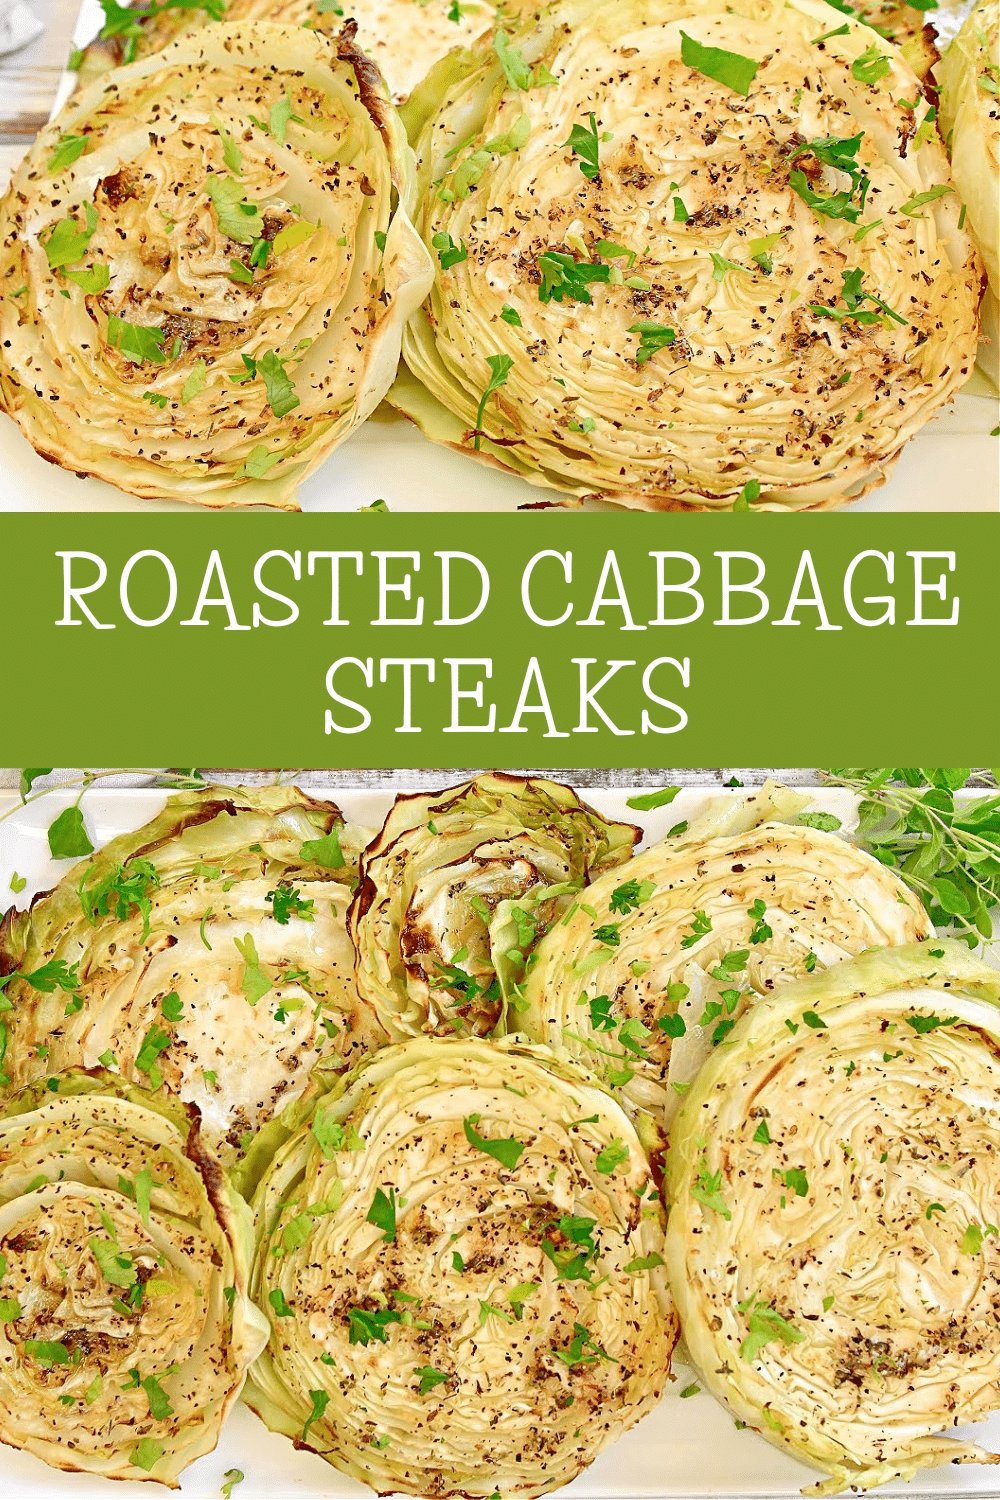 Roasted Cabbage Steaks Recipe ~ Thick cabbage slices seasoned with simple ingredients and roasted to perfection.  via @thiswifecooks